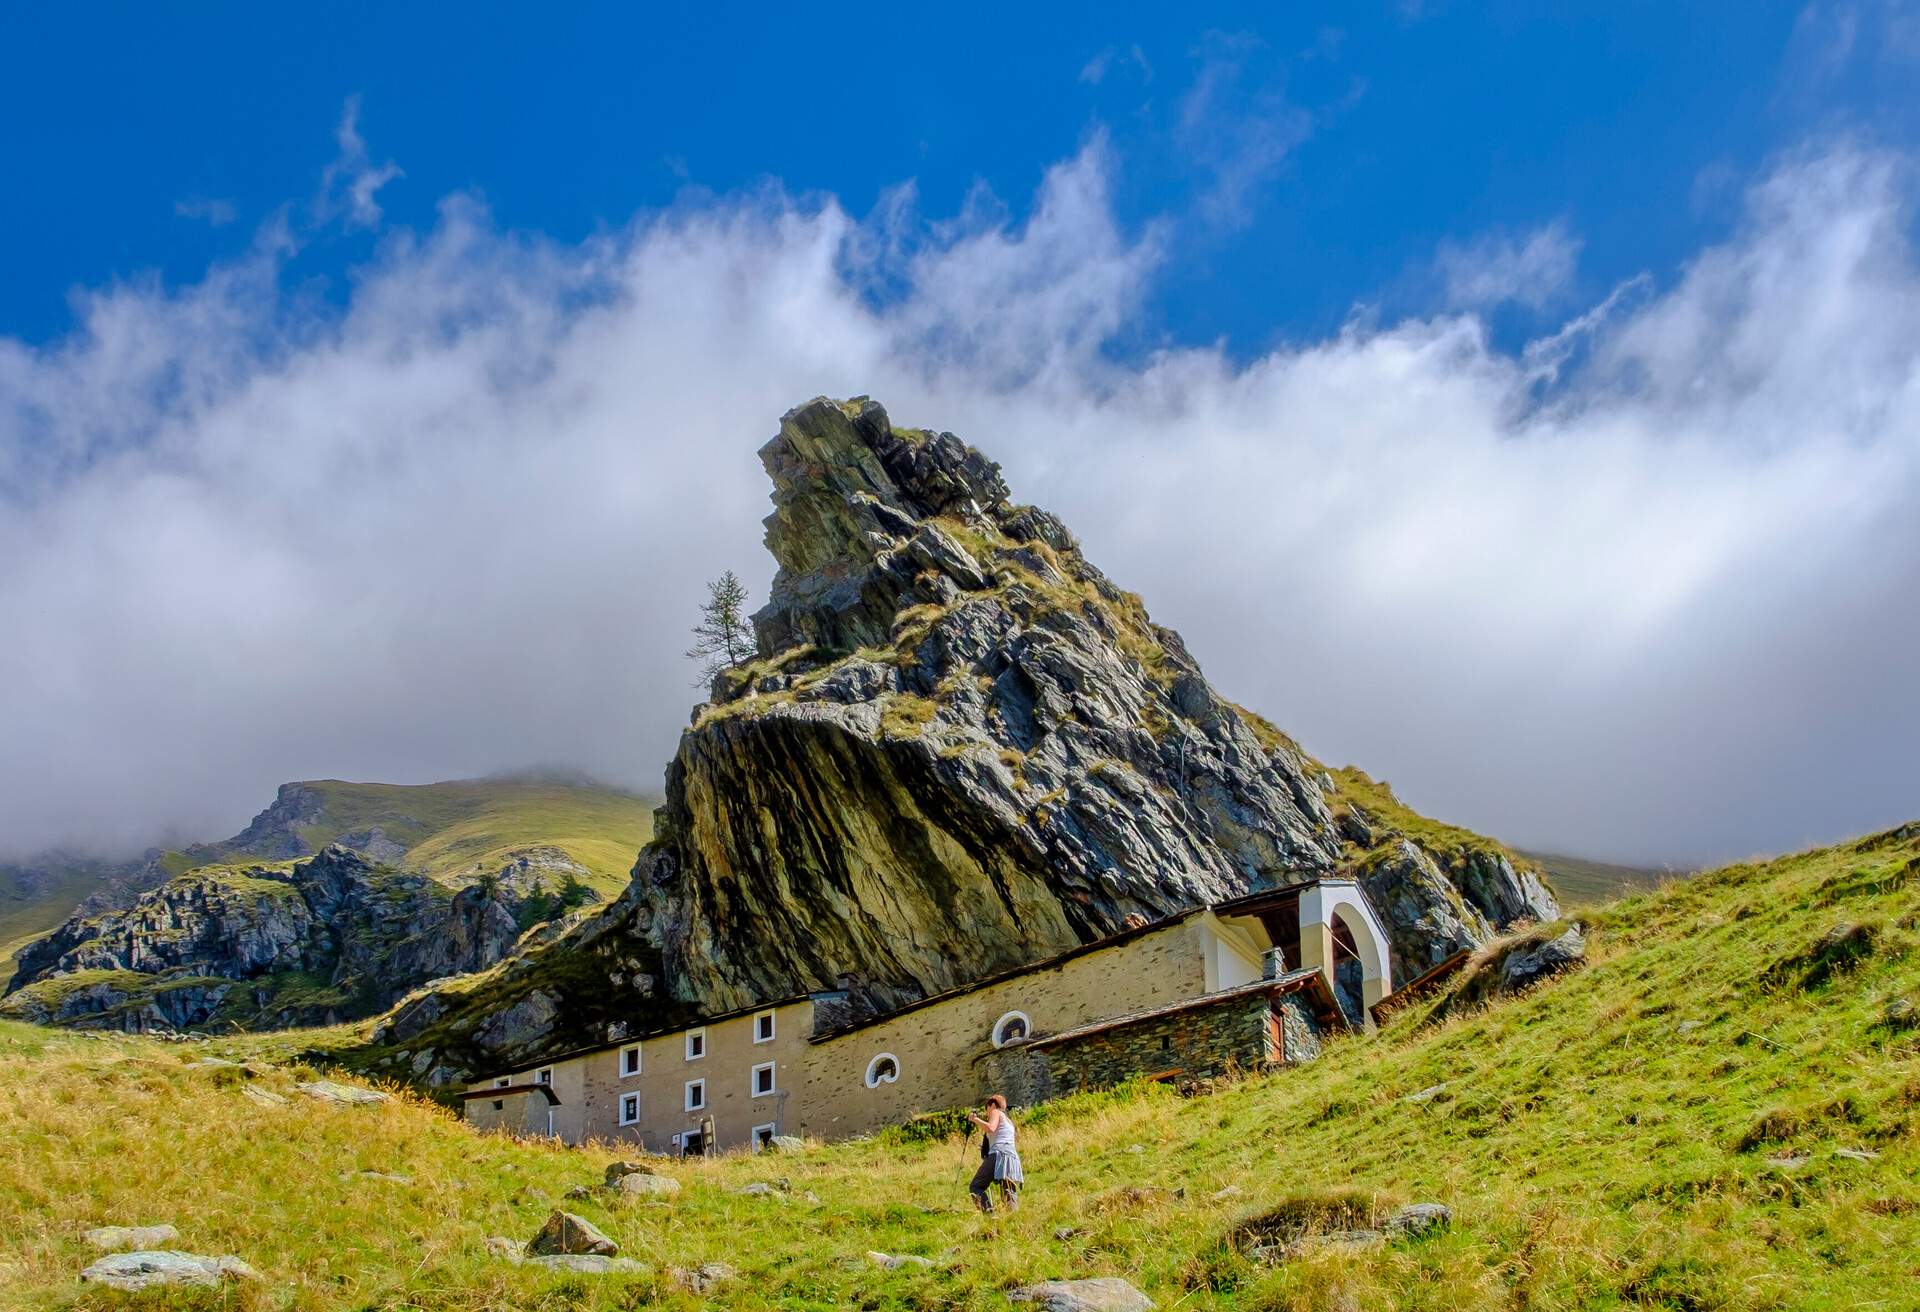 DEST_ITALY_ALPS_GRAN-PARADISO-NATIONAL-PARK_THEME_HIKING_GettyImages-936559726